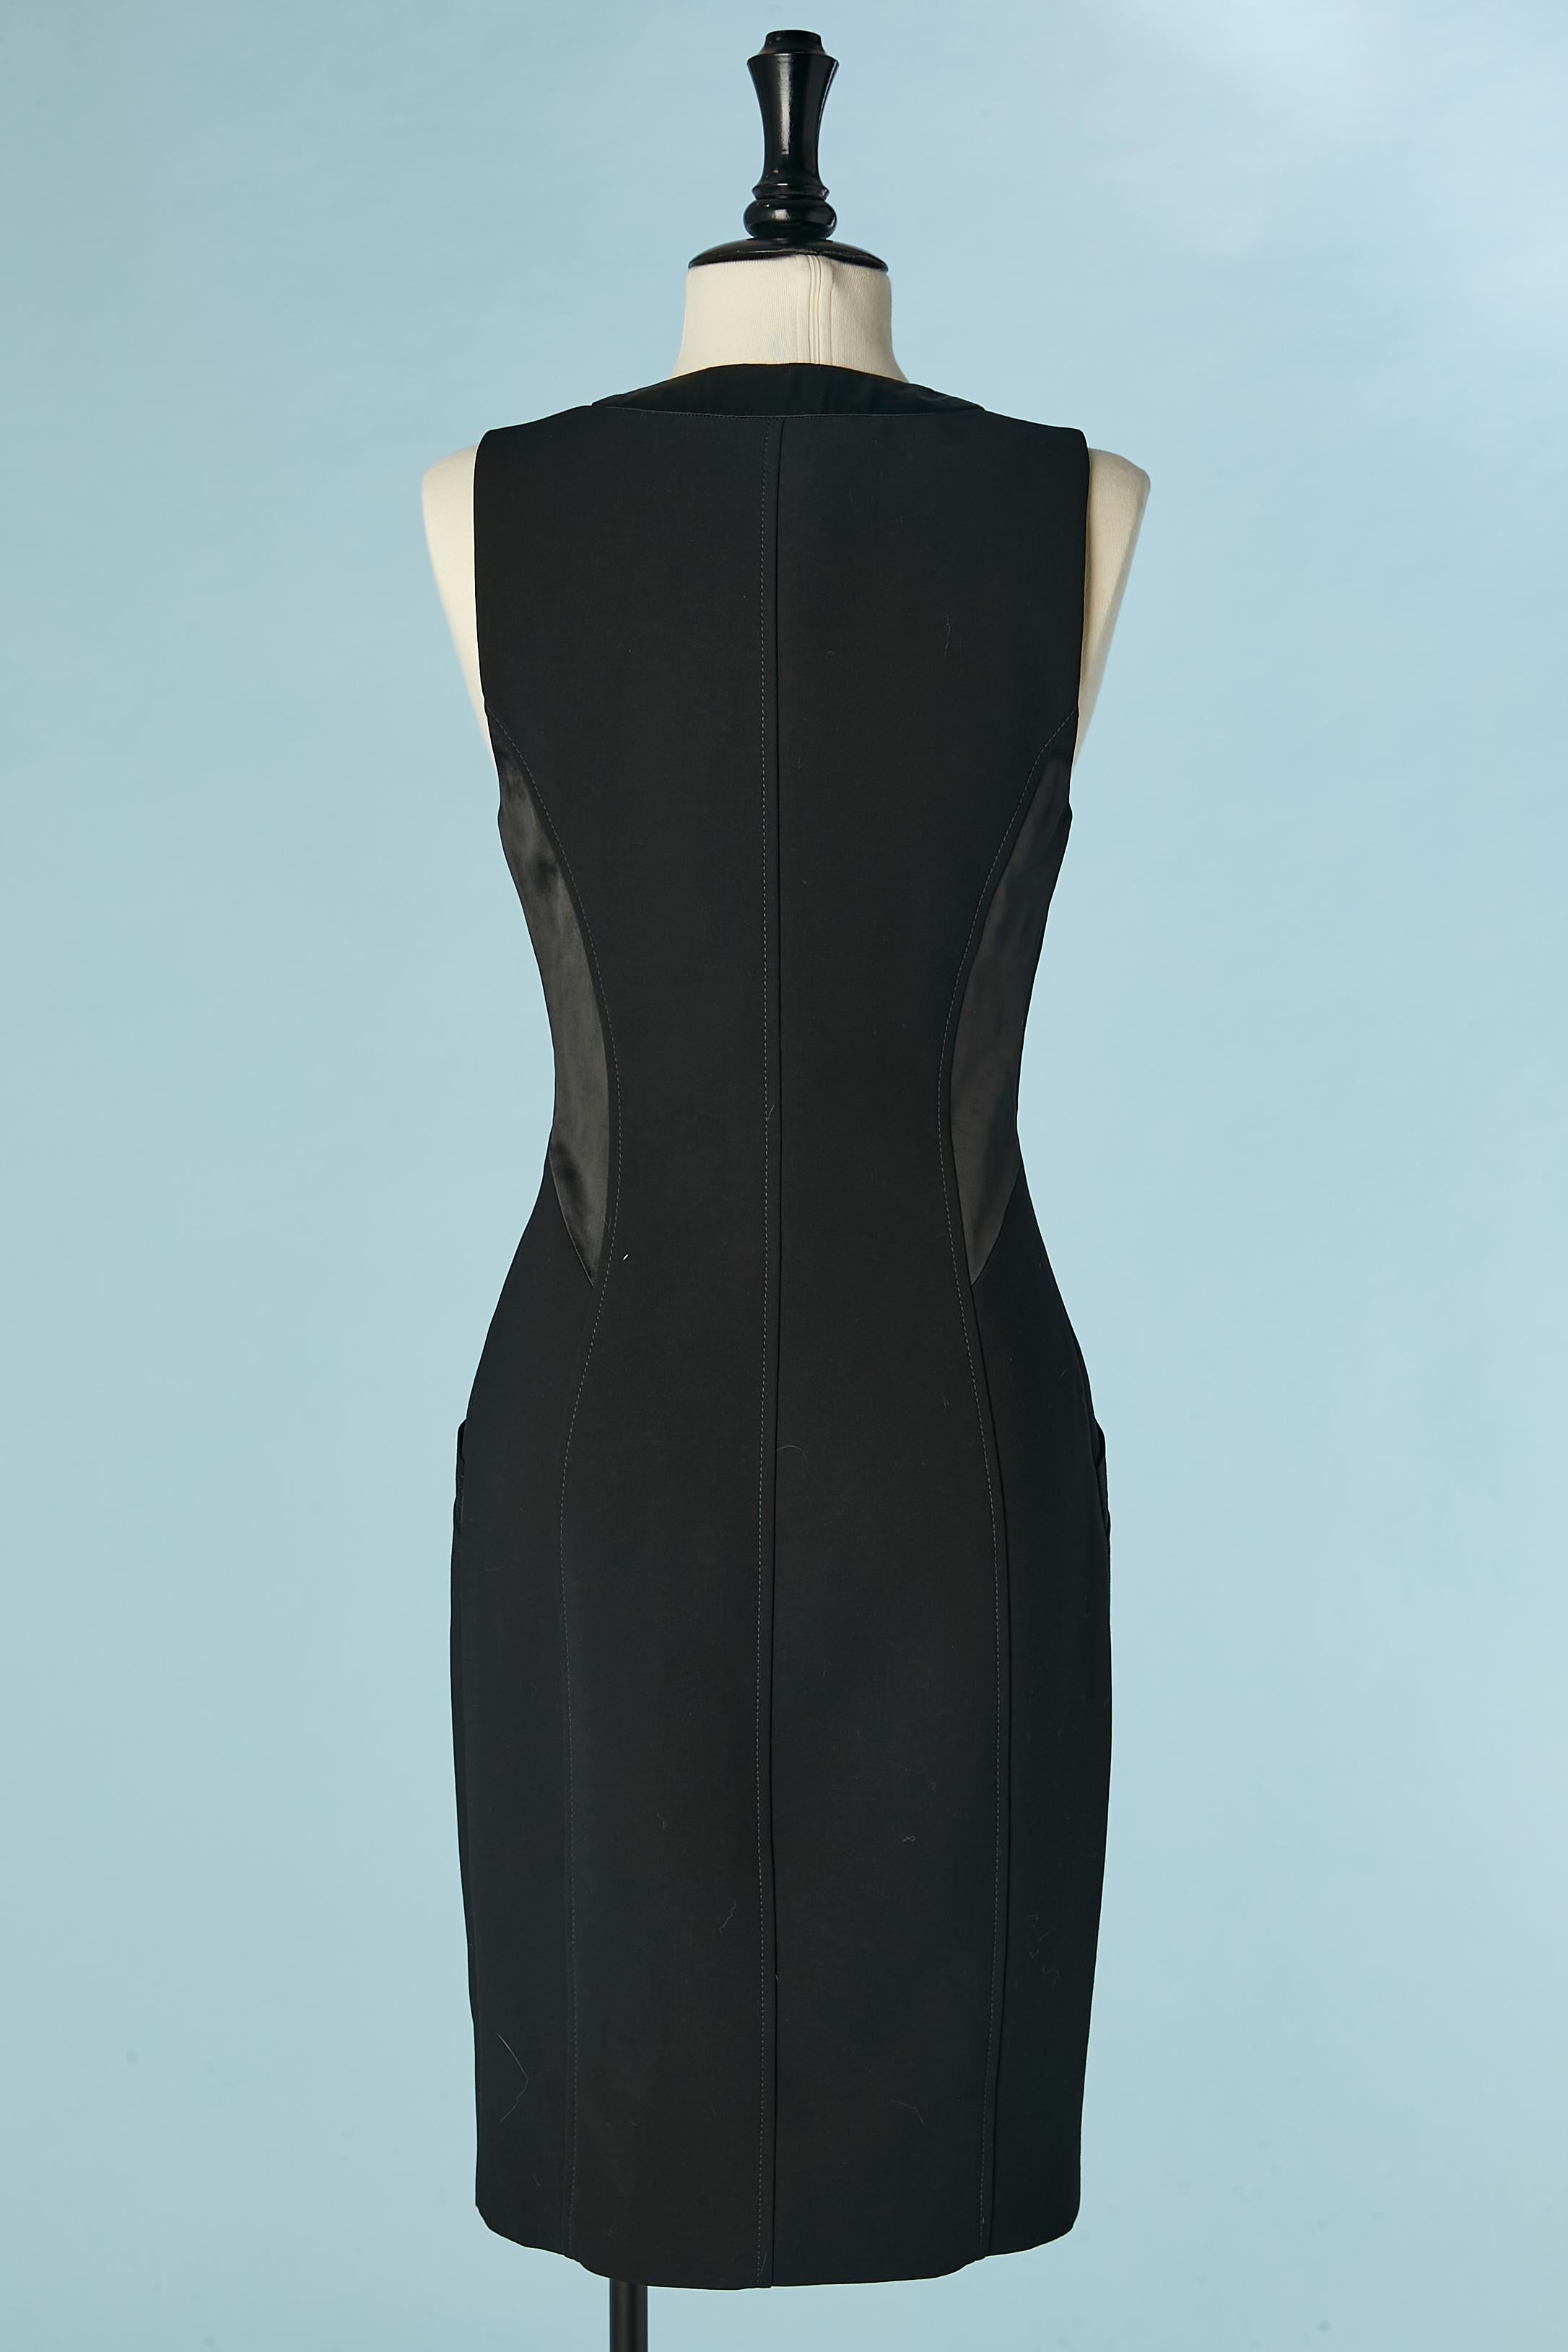 Black bi-material sleeveless dress with zip closure in the front  Barbara Bui  For Sale 2